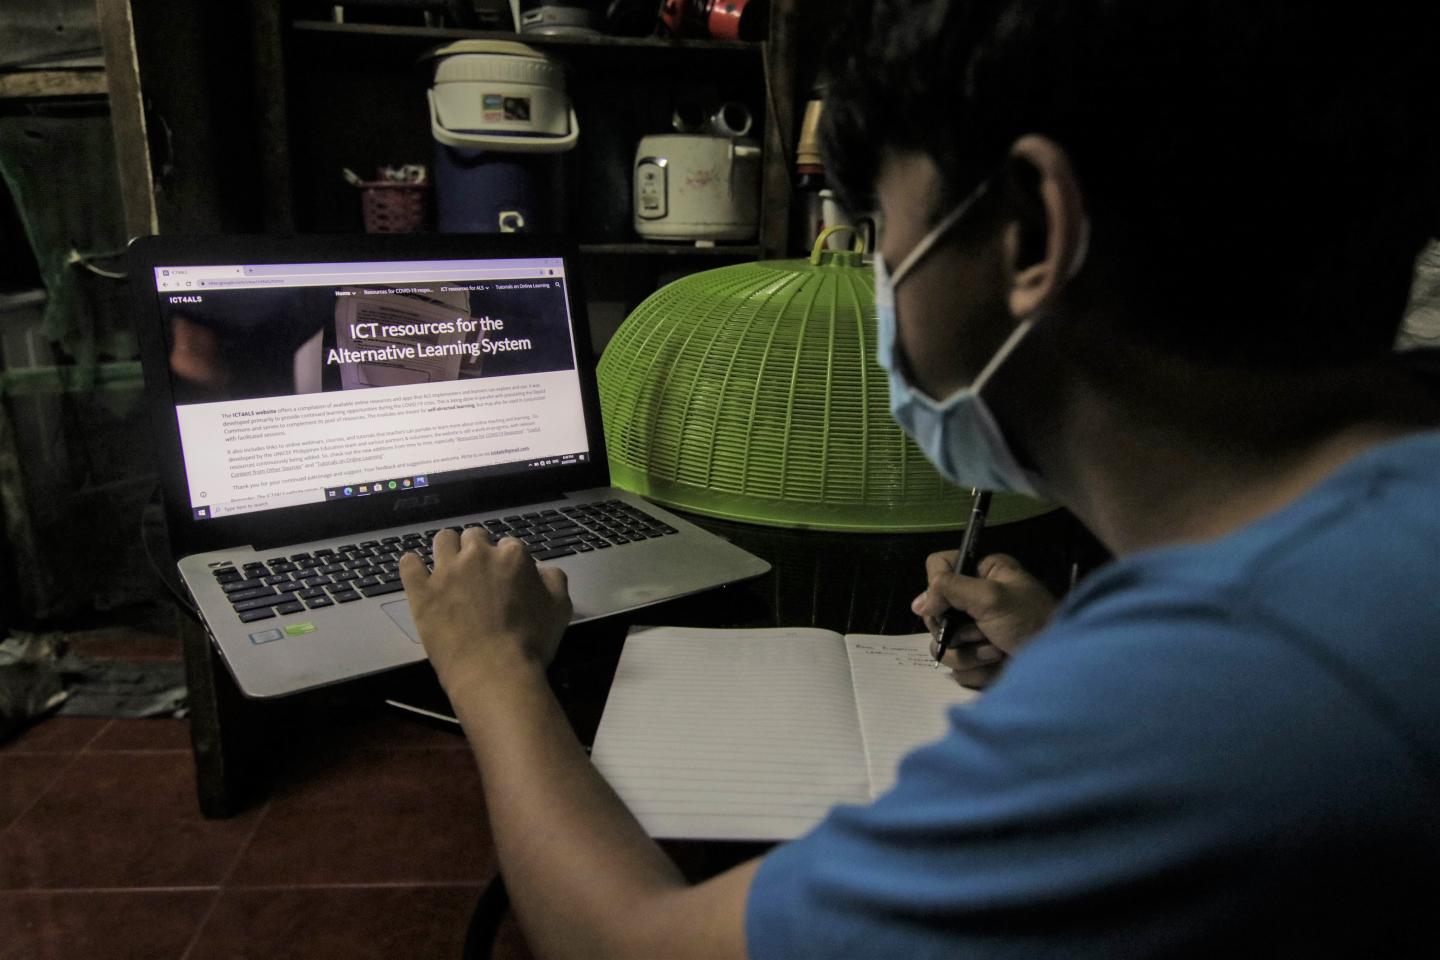 education after pandemic in the philippines essay